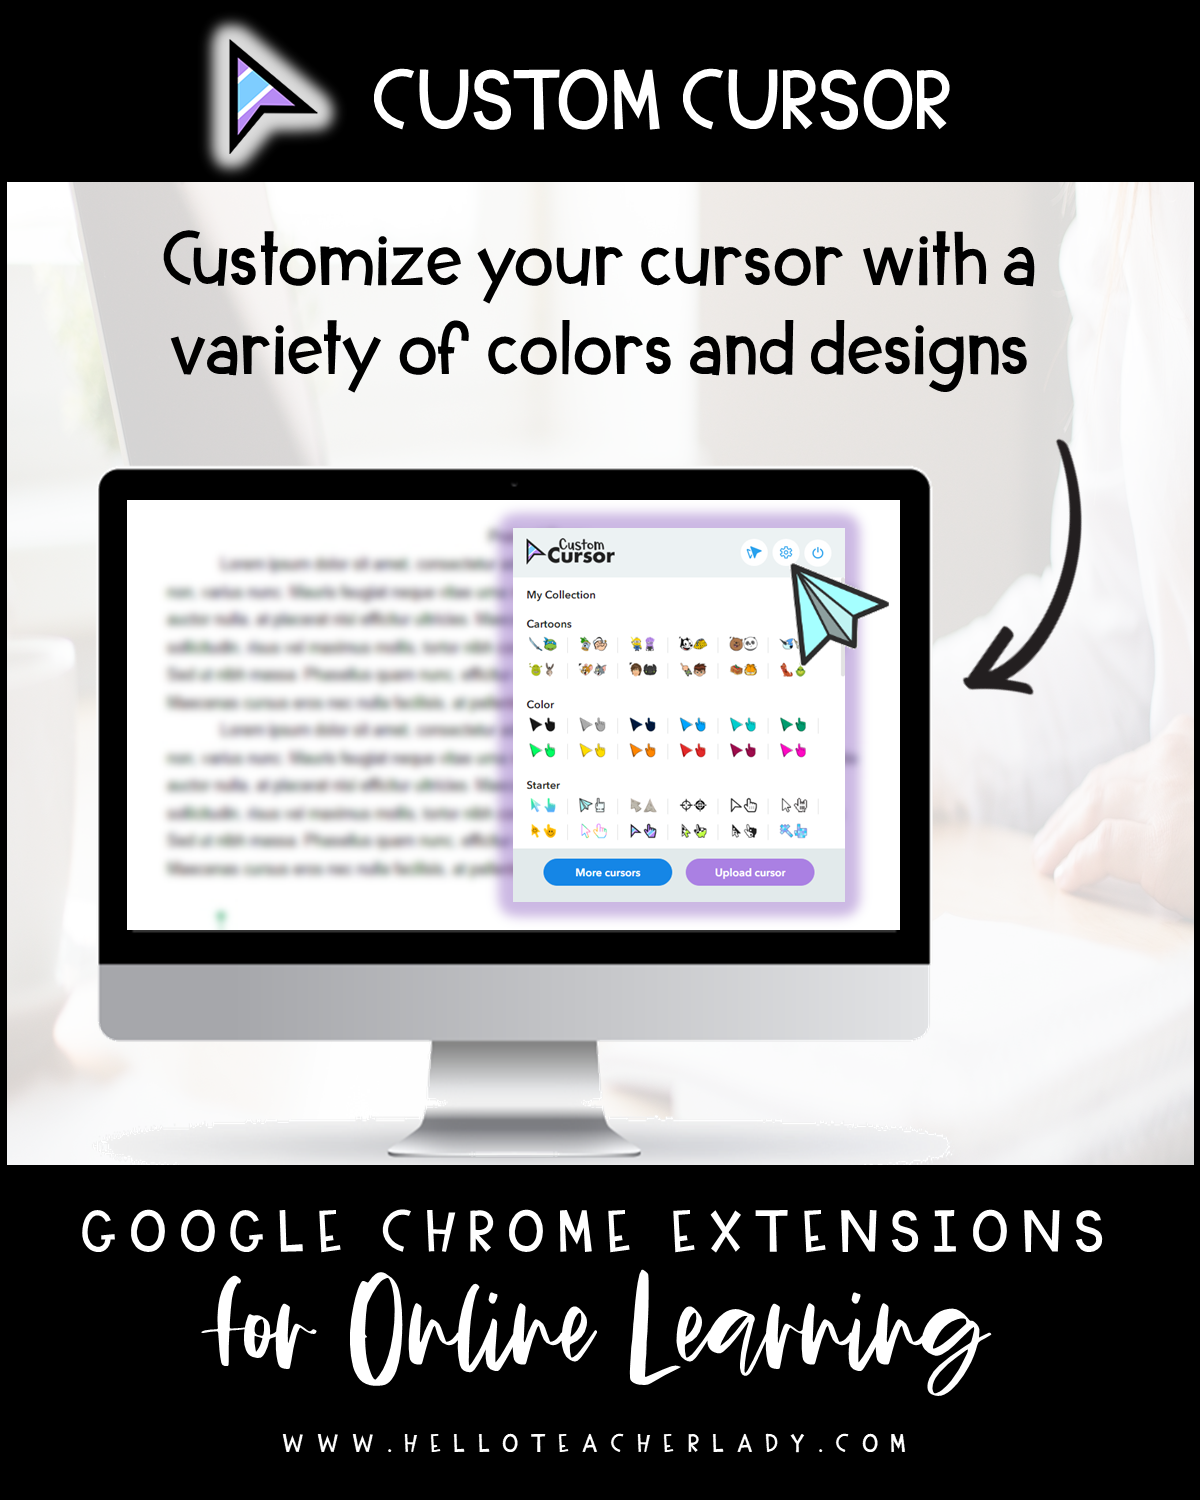 5 Helpful Google Chrome Extensions for Online Distance Learning